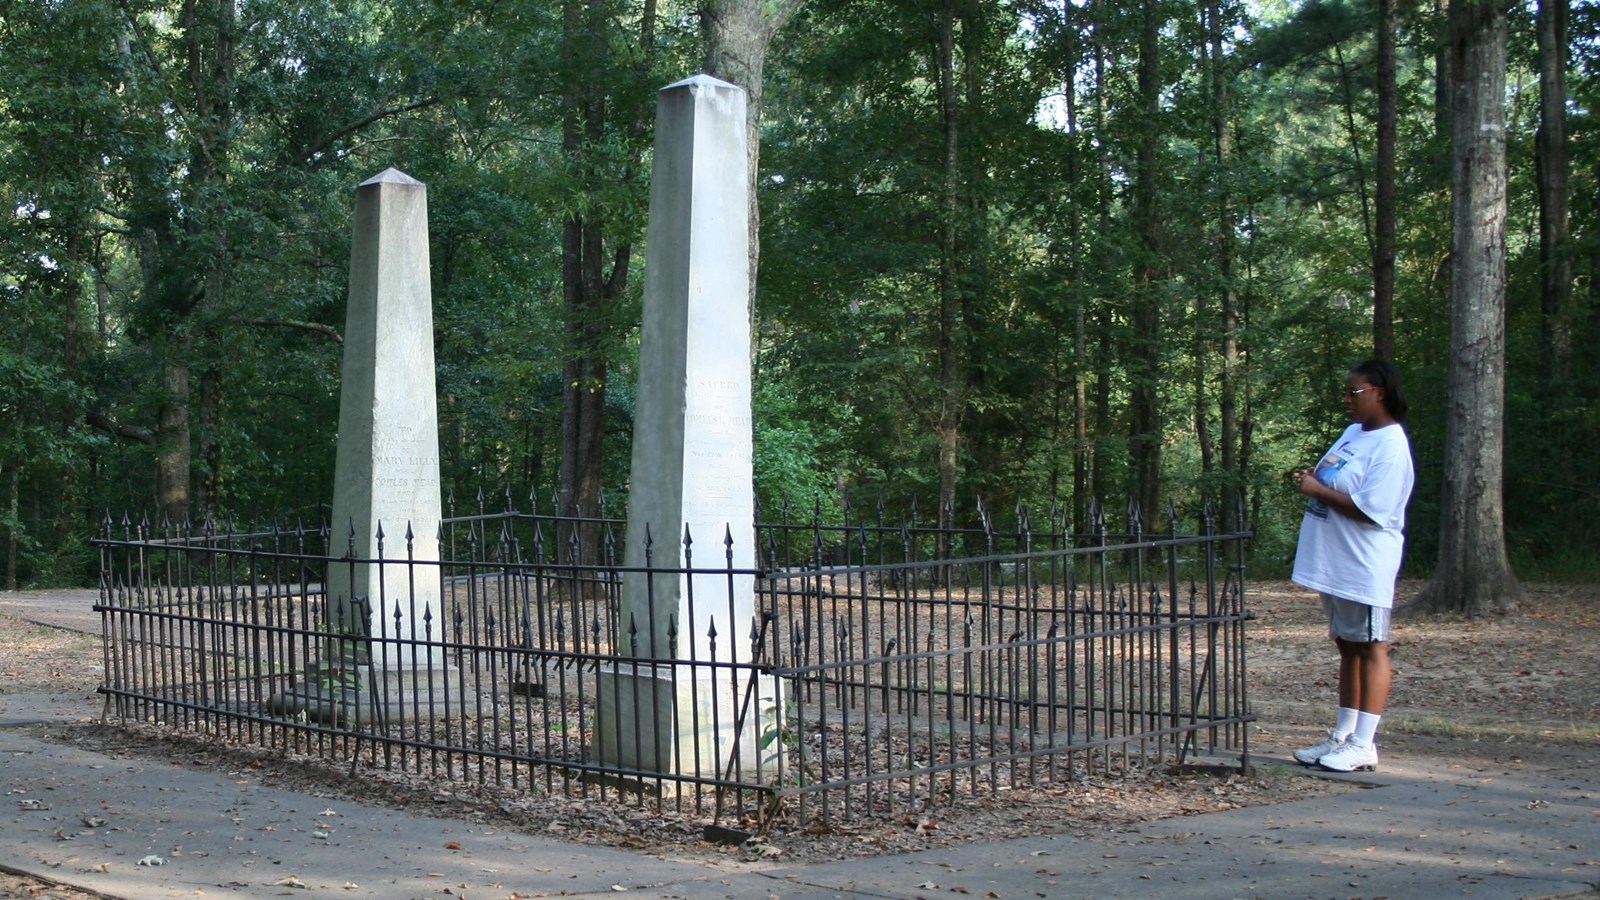 Two white obelisks are surround by iron fence with a park visitor reading the graves